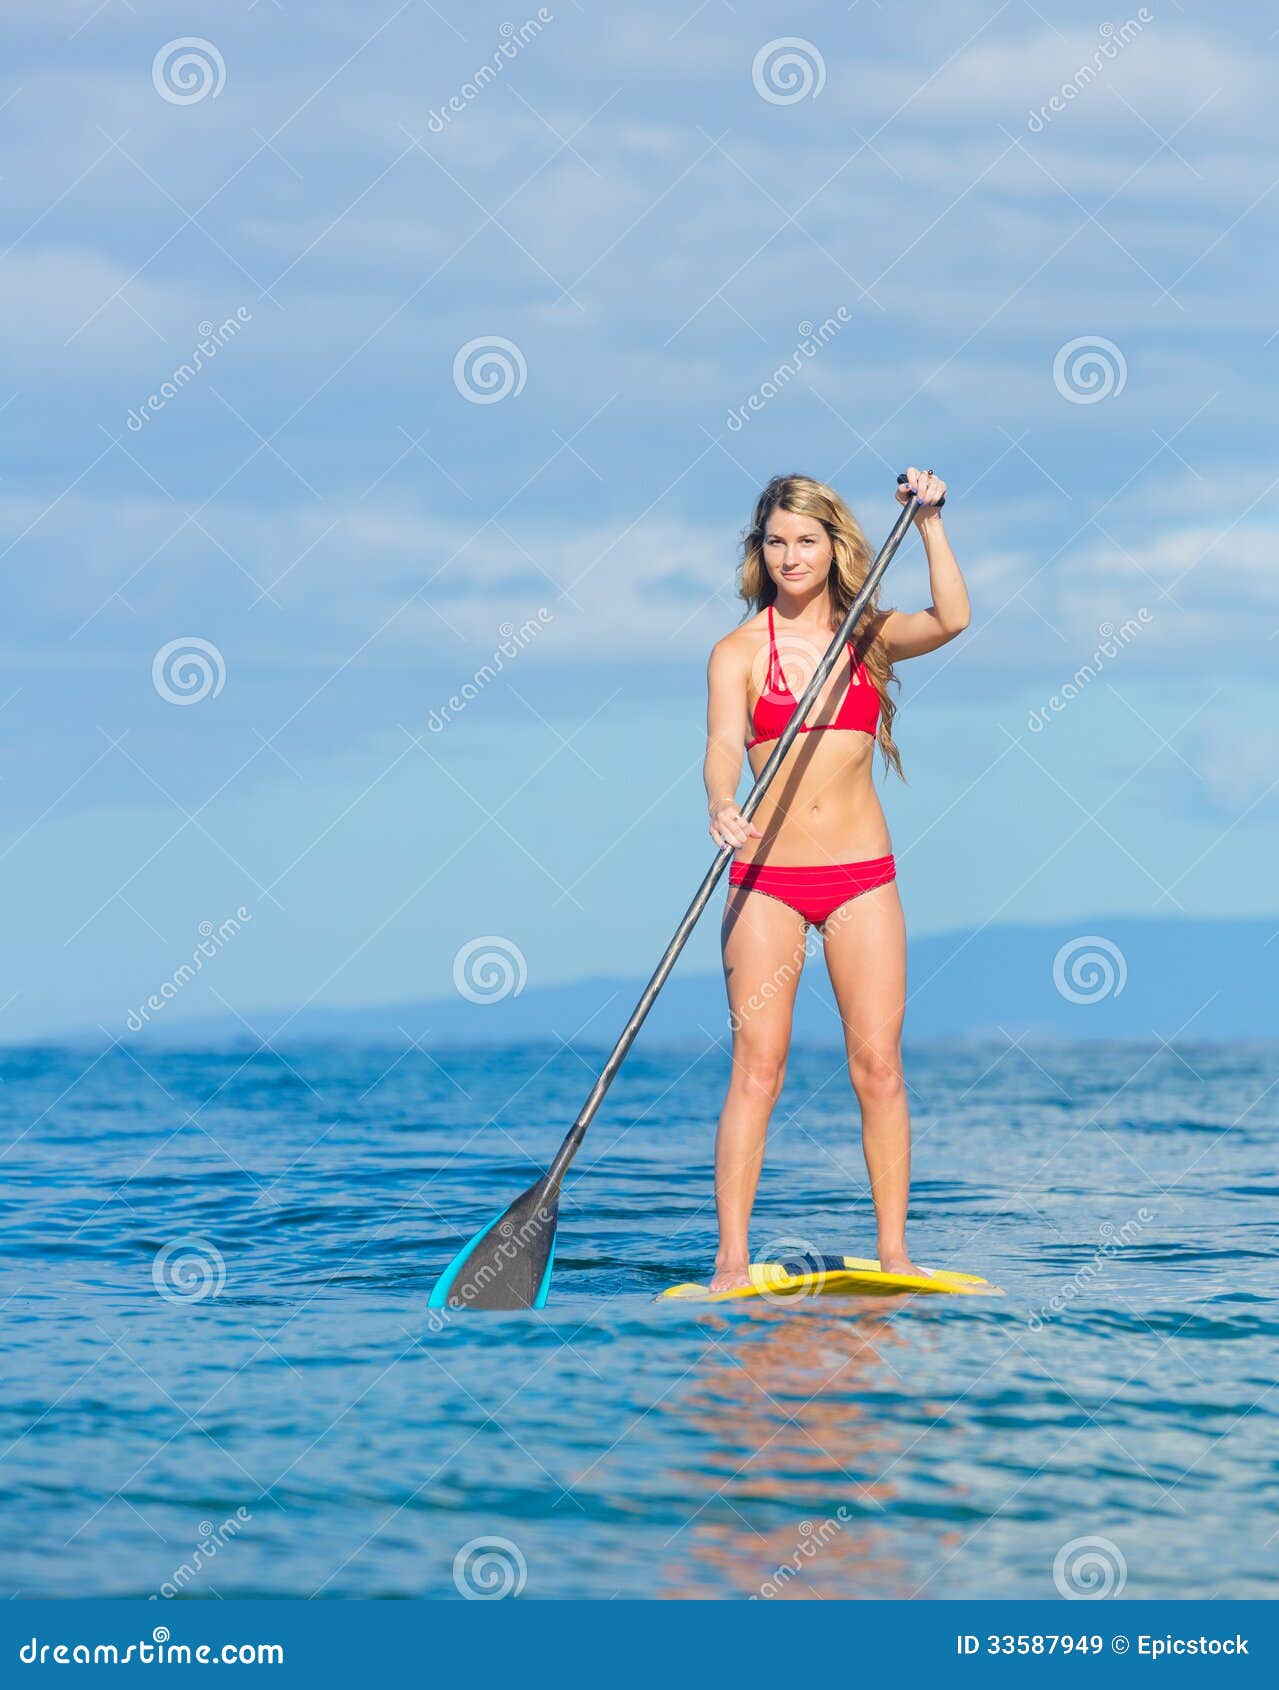 Woman On Stand Up Paddle Board Royalty Free Stock Images